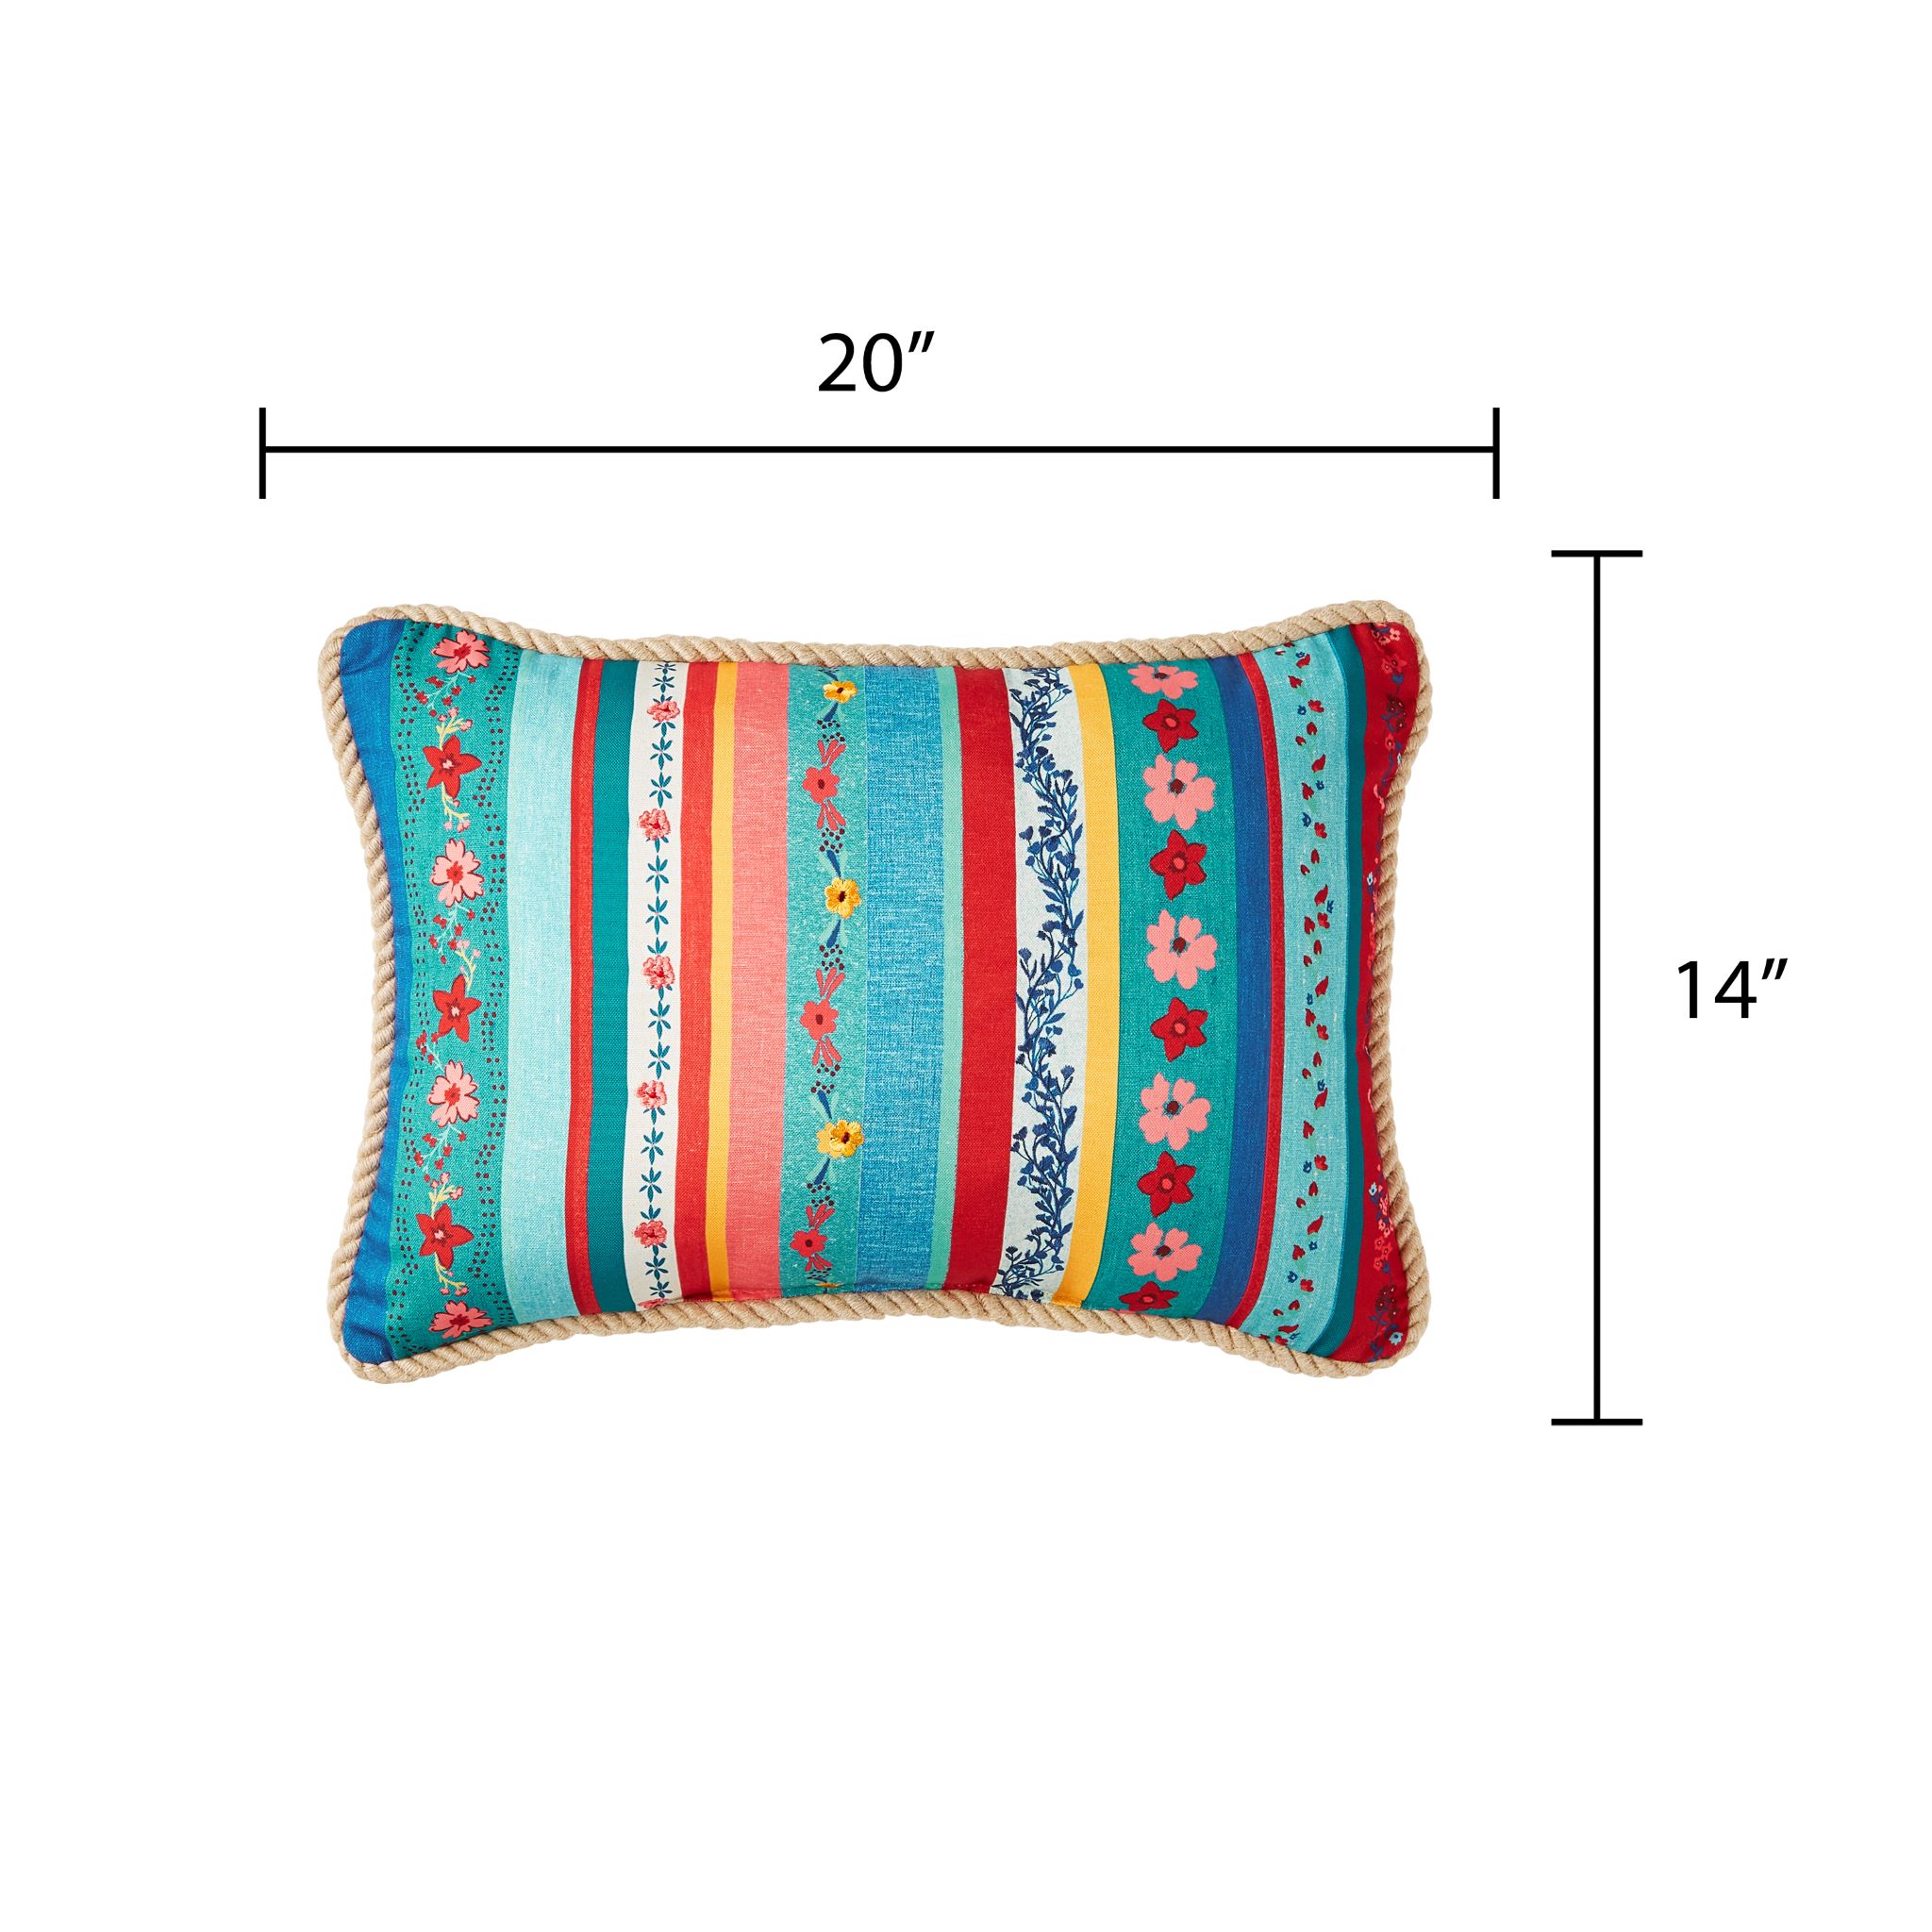 The Pioneer Woman Floral Stripe Outdoor Pillow, 14" x 20", Multicolor - image 2 of 8